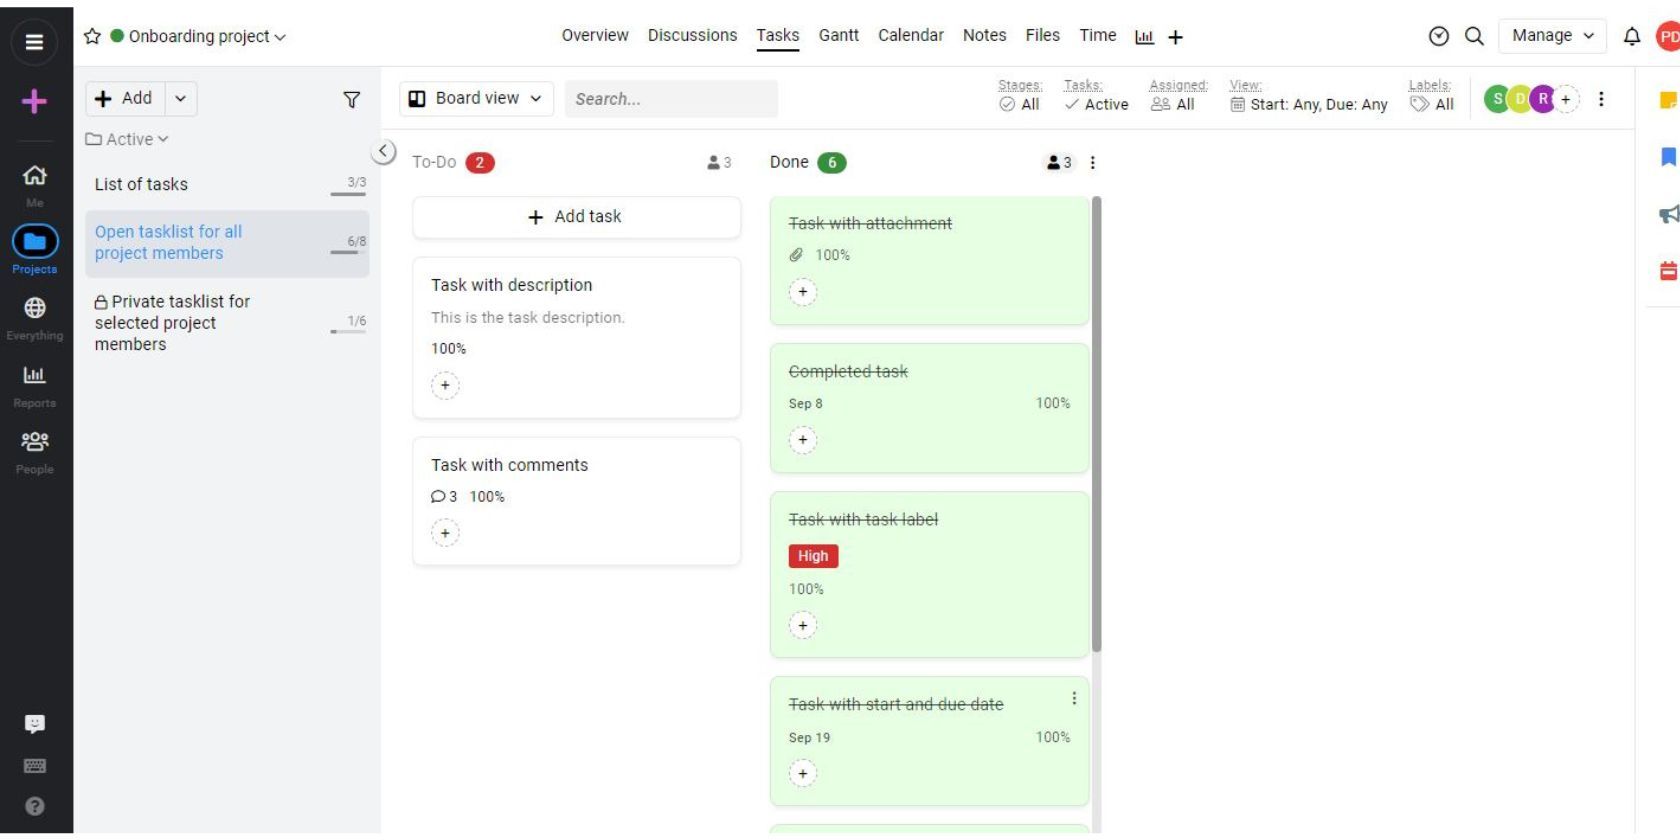 ProofHub's Workflow and Kanban Board view